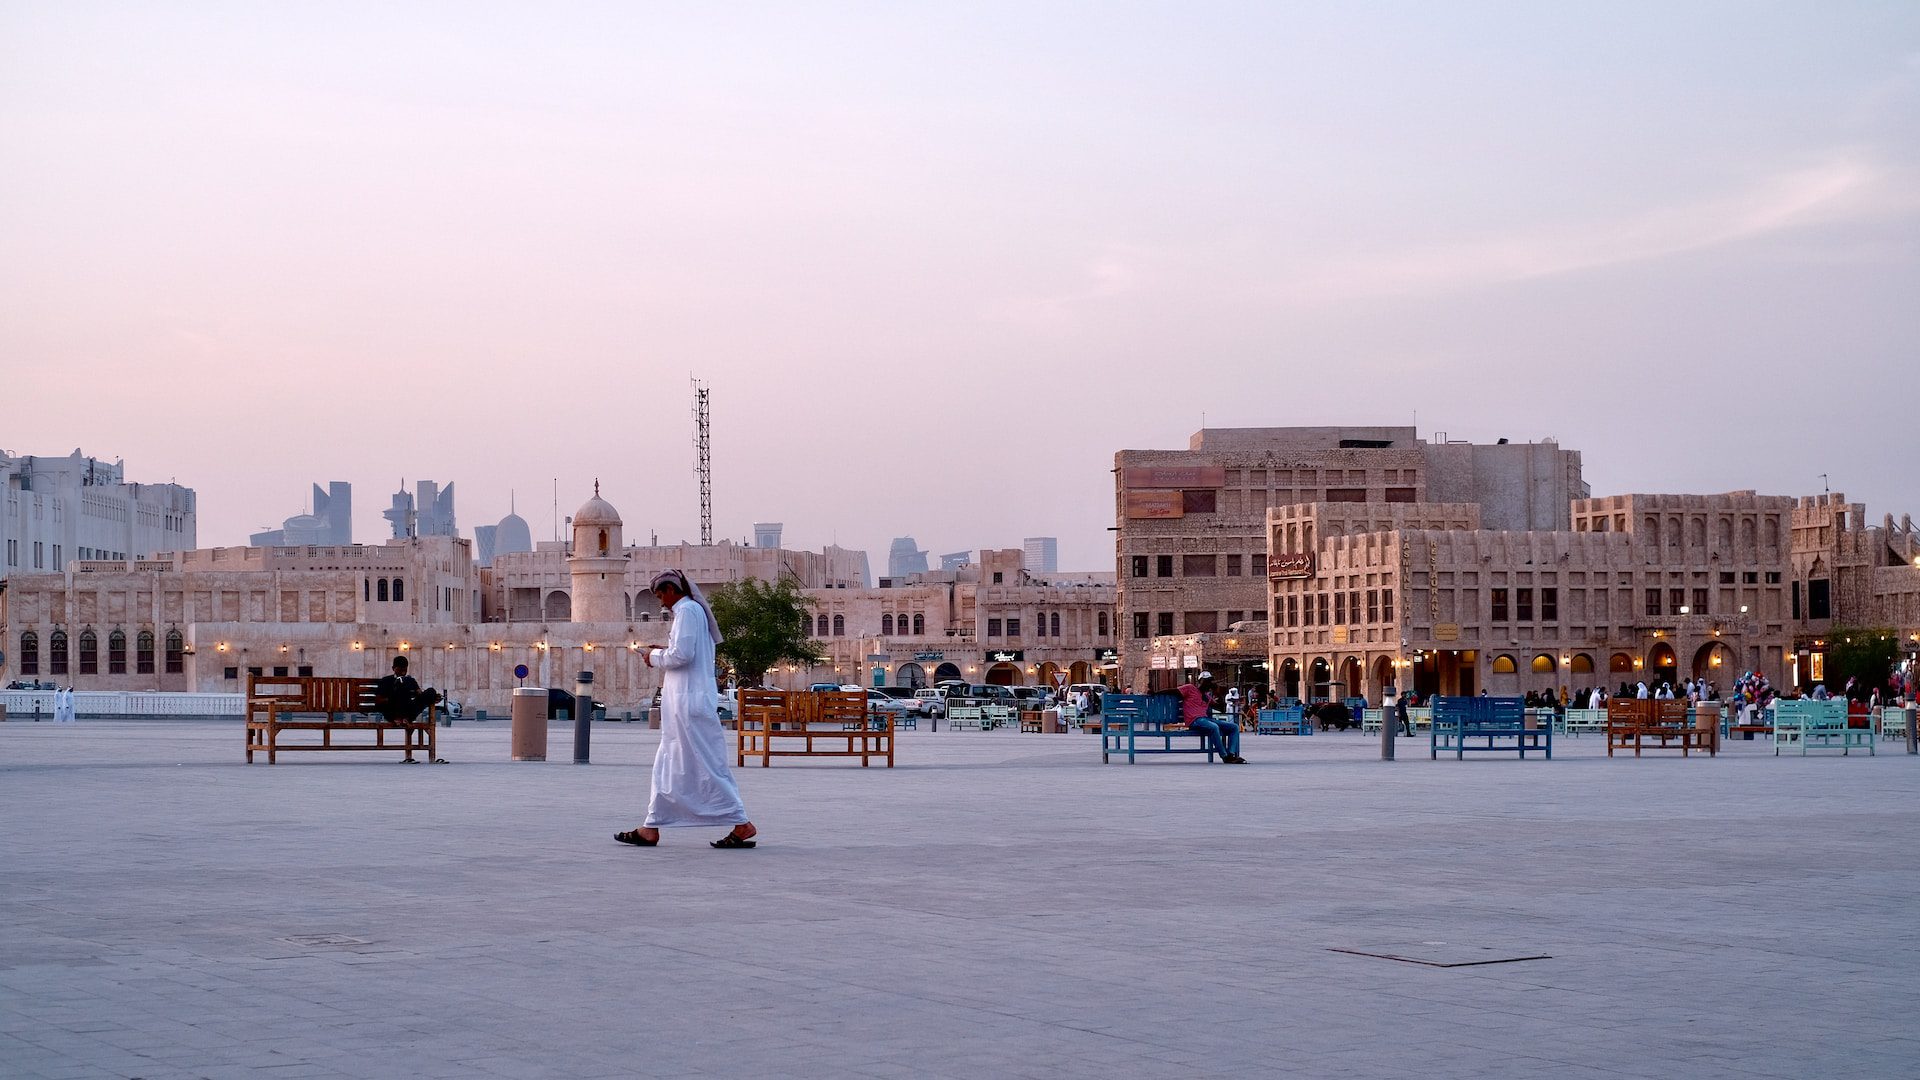 Souq Waqif at sunset with stalls and people in the square.